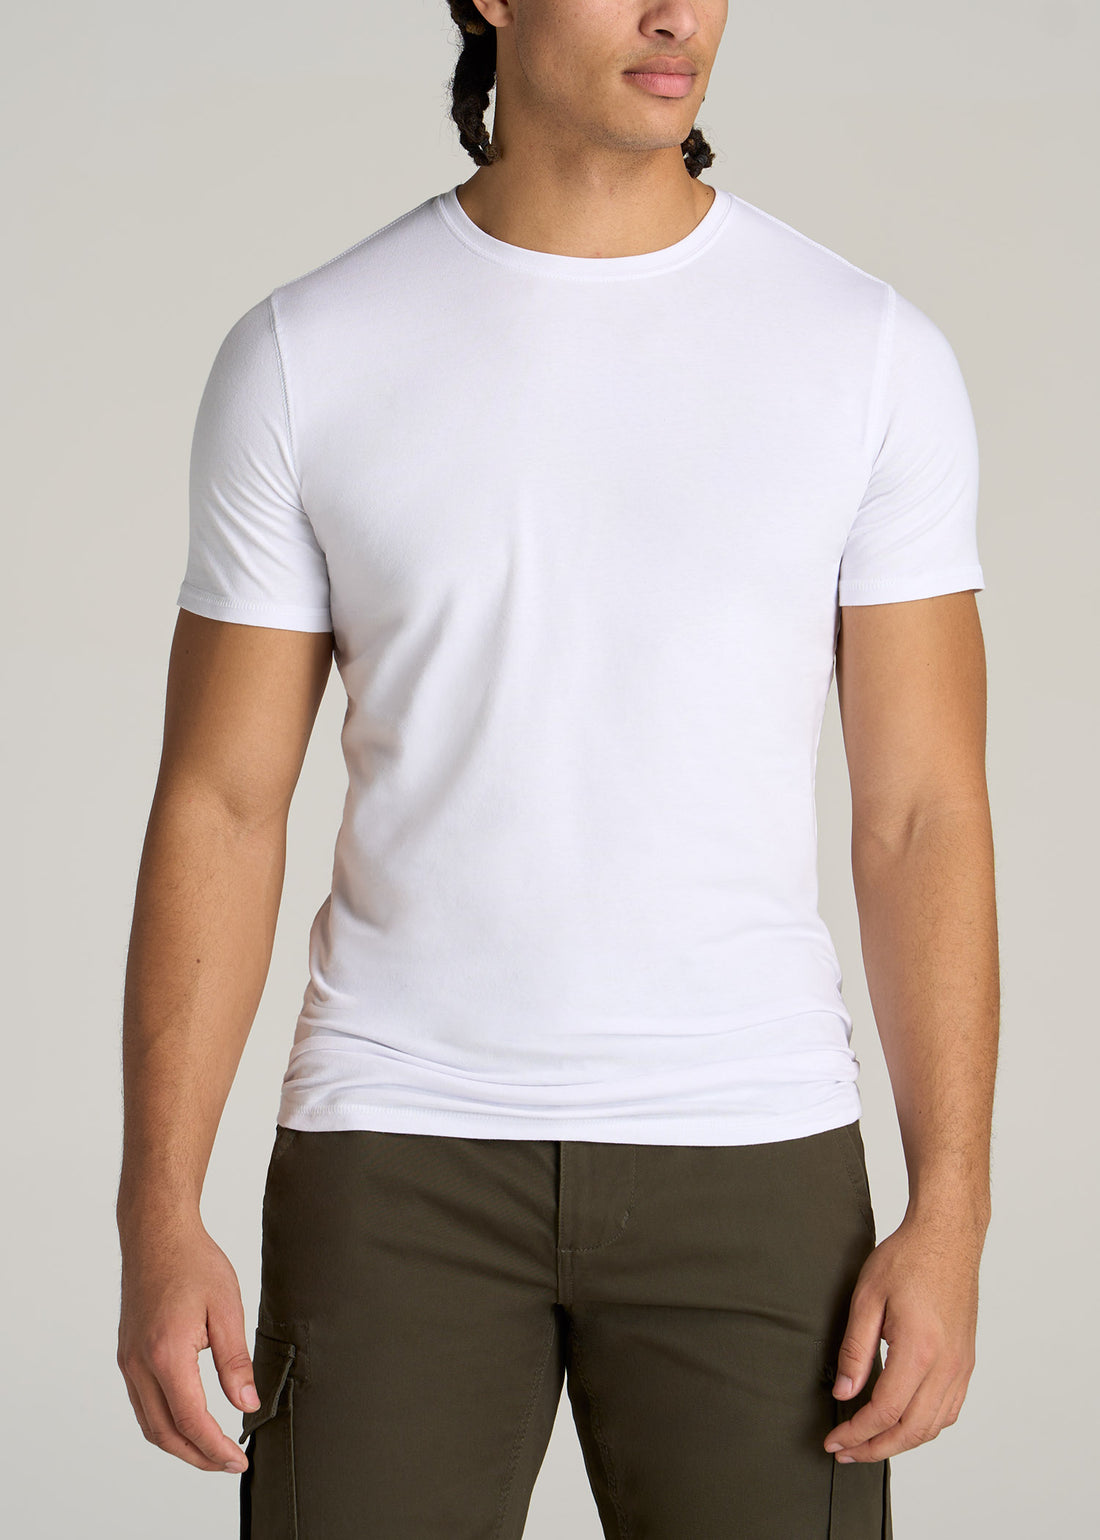 Tall man wearing American Tall's Essential Slim-Fit Crewneck Tee in the color White.